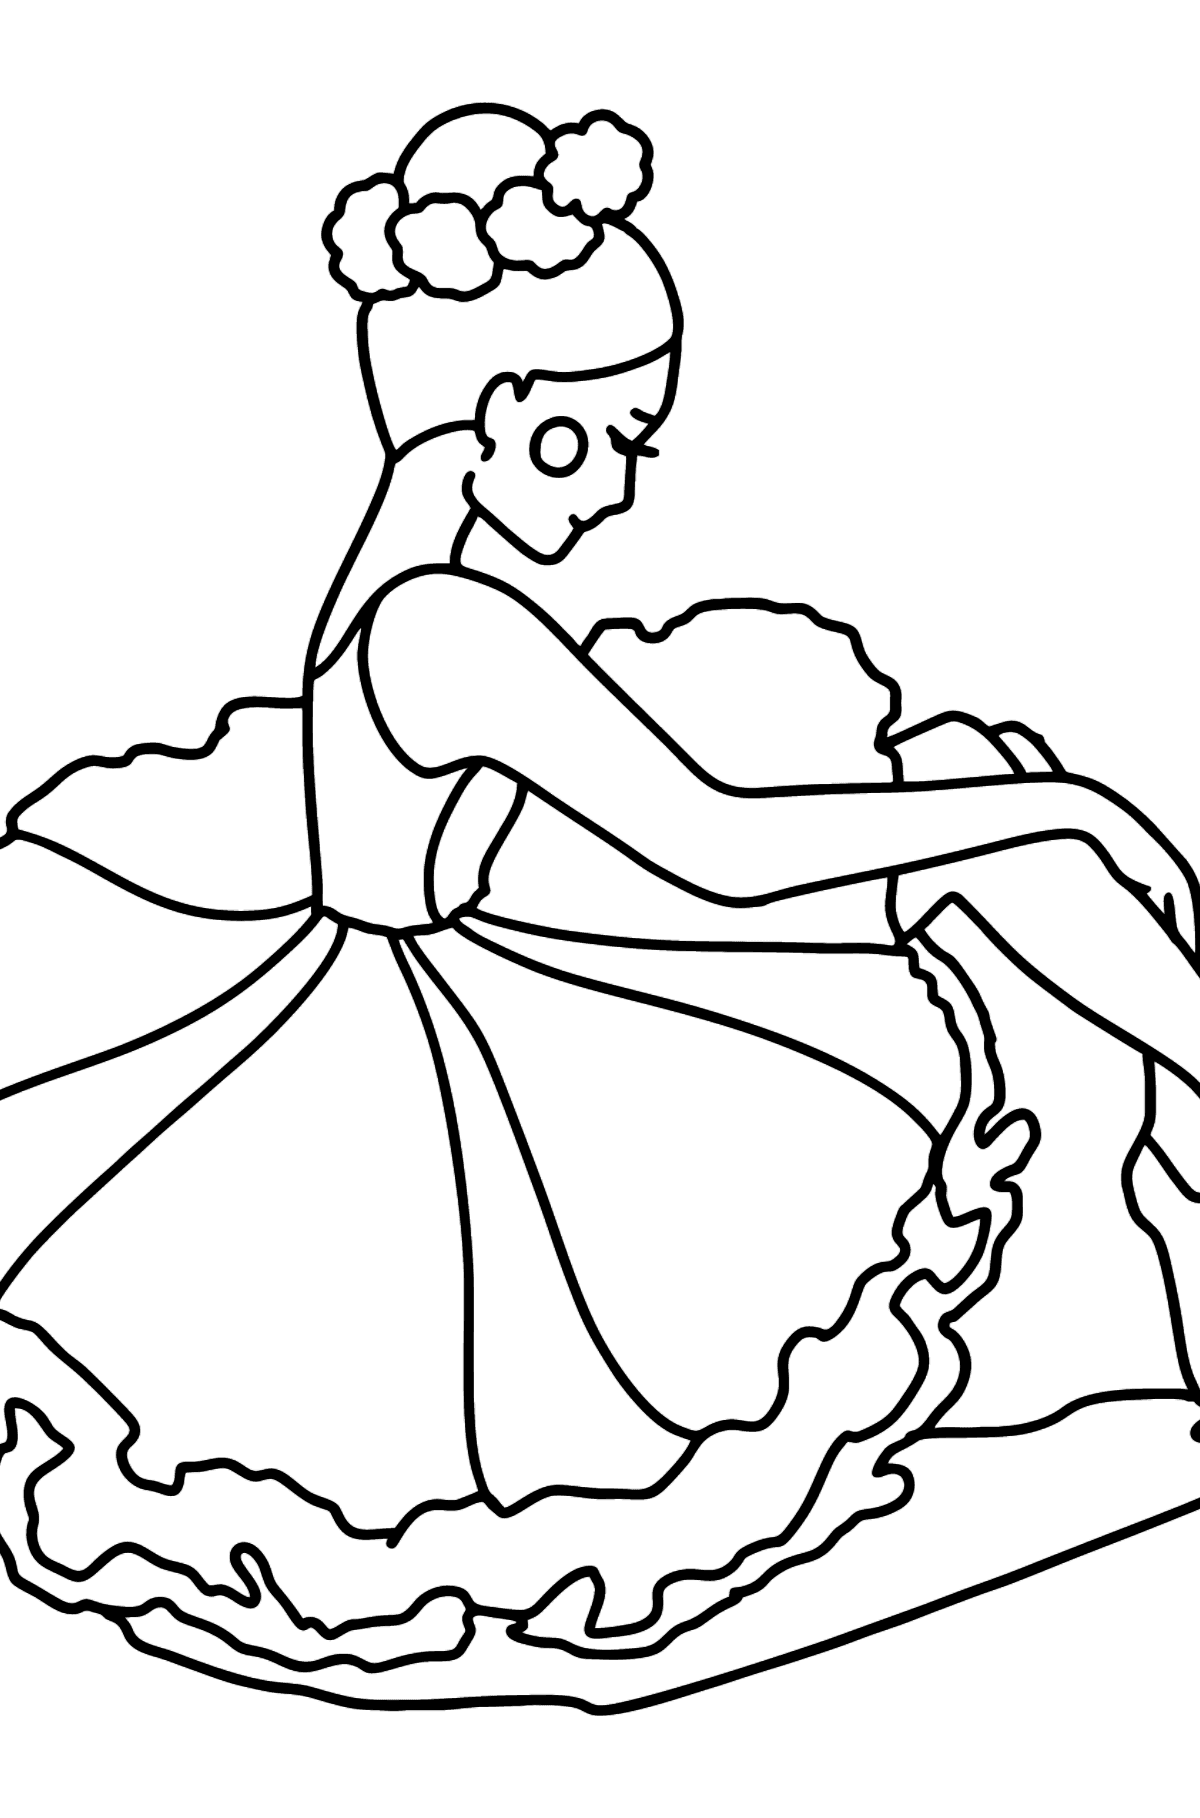 Ballerina in a Lush Dress coloring page - Coloring Pages for Kids